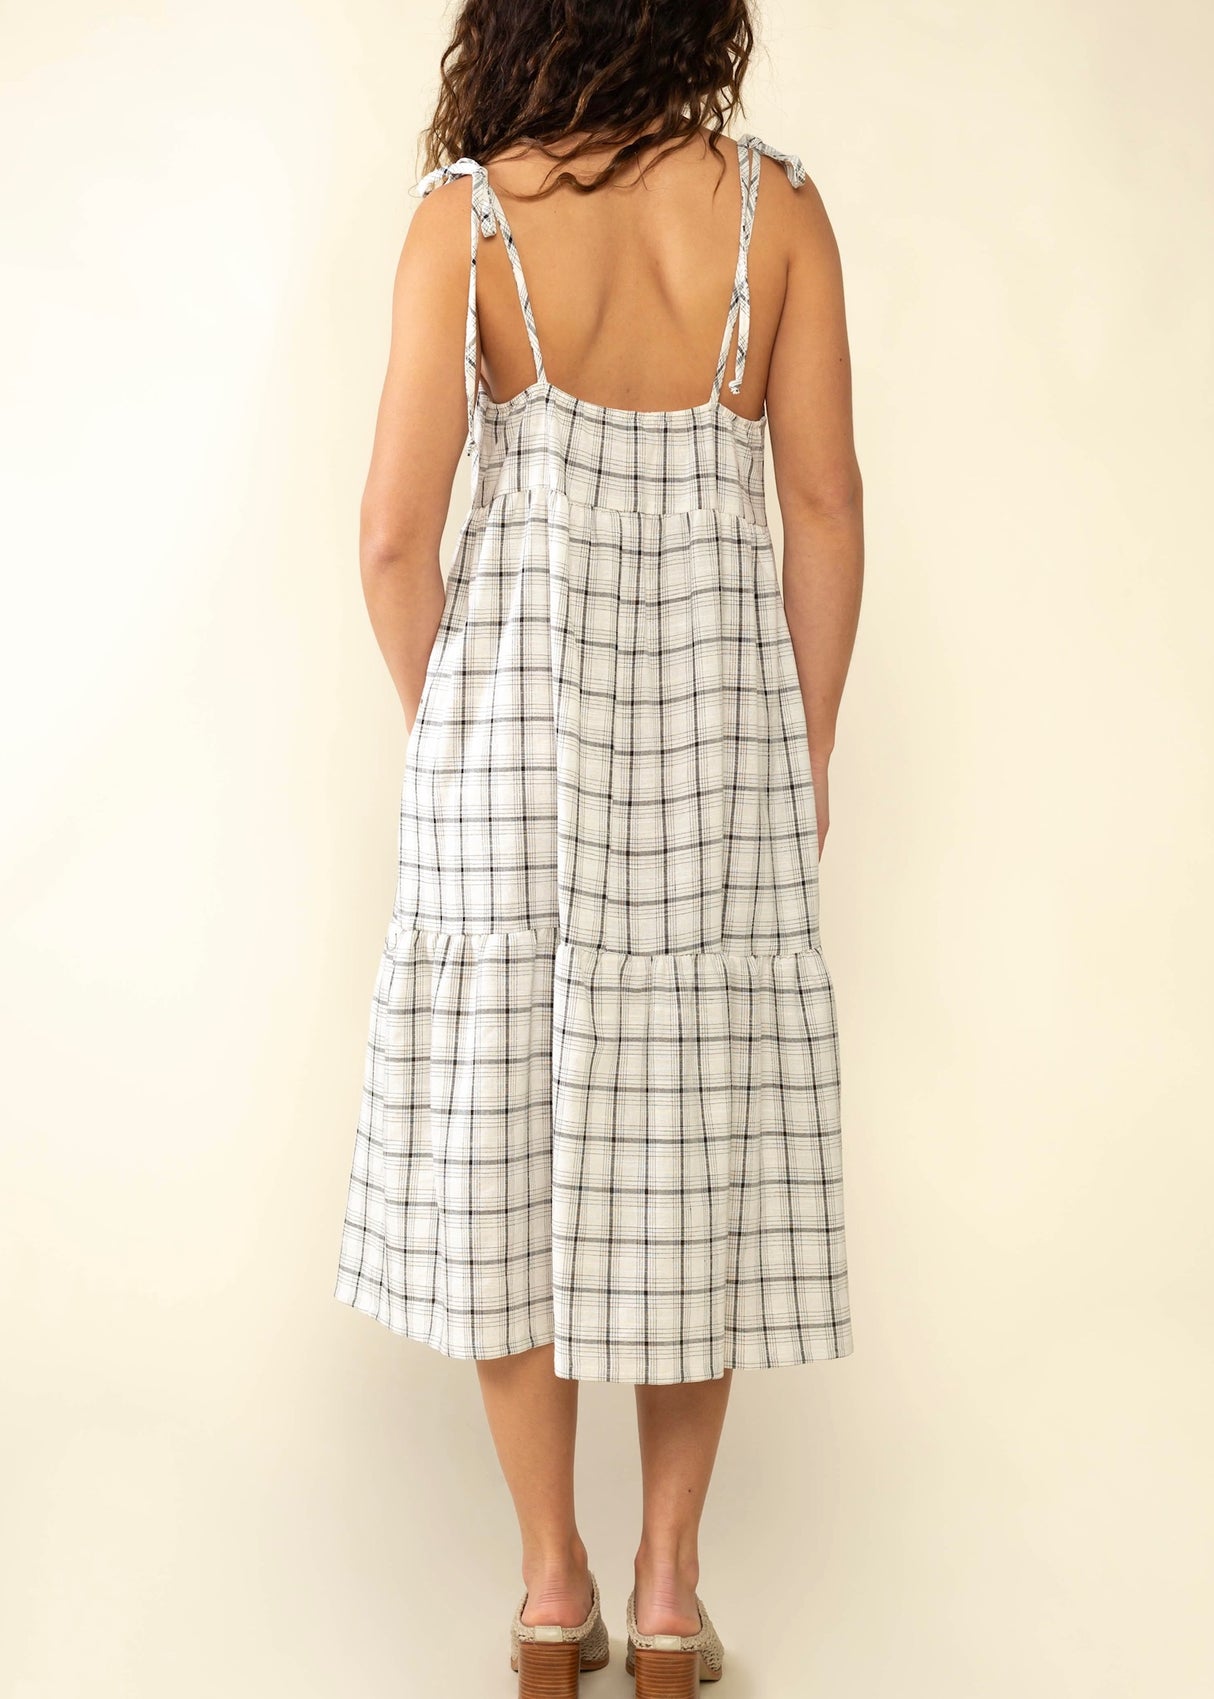 Lucille Check Dress